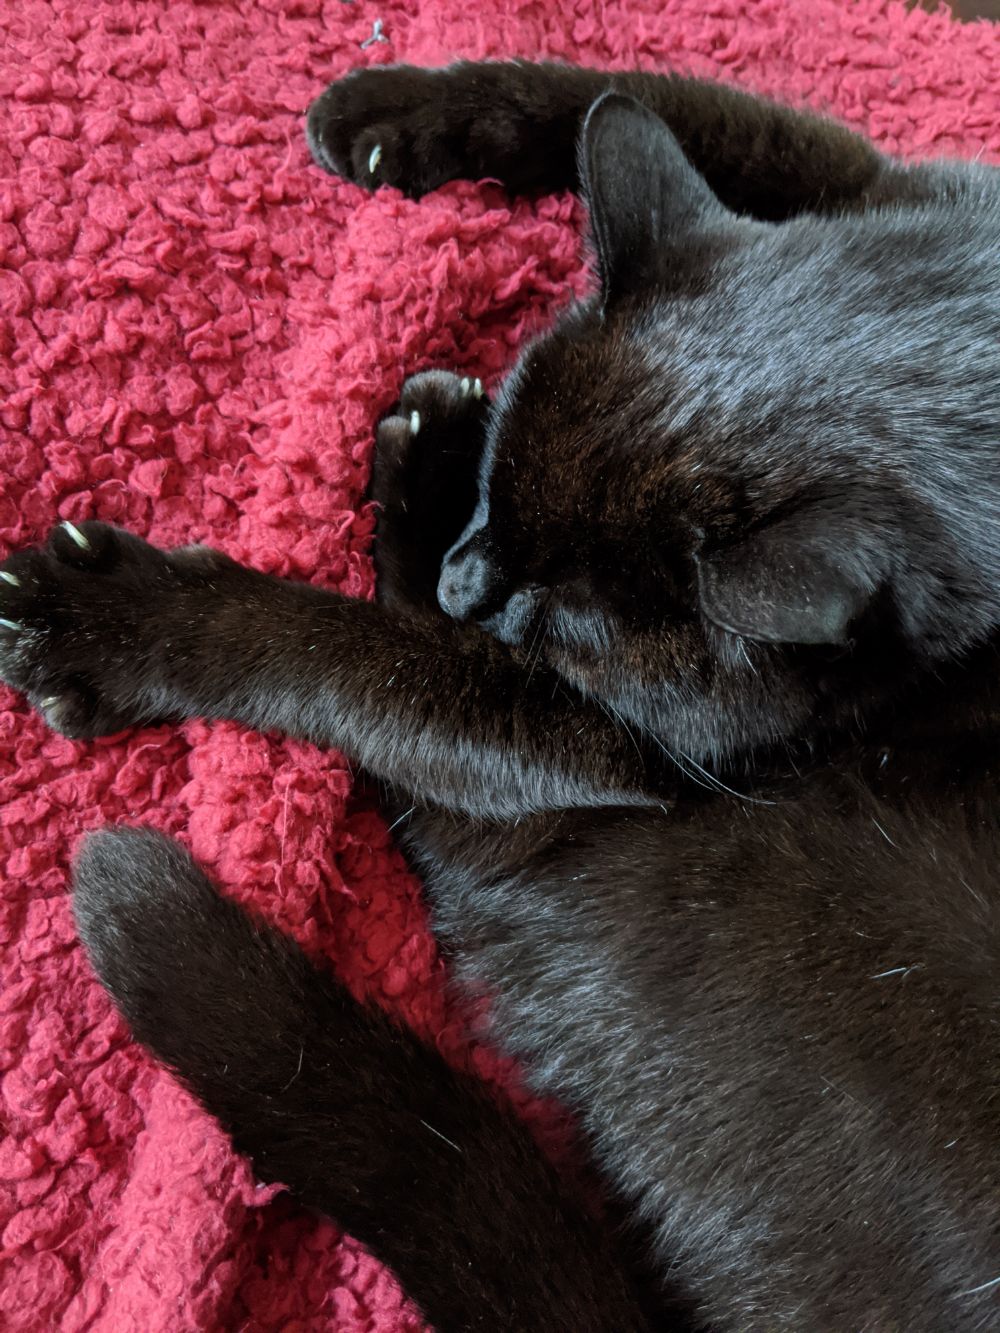 Black cat with three out of four paws visible, with one of his back paws curled round in a somehow comfortable position